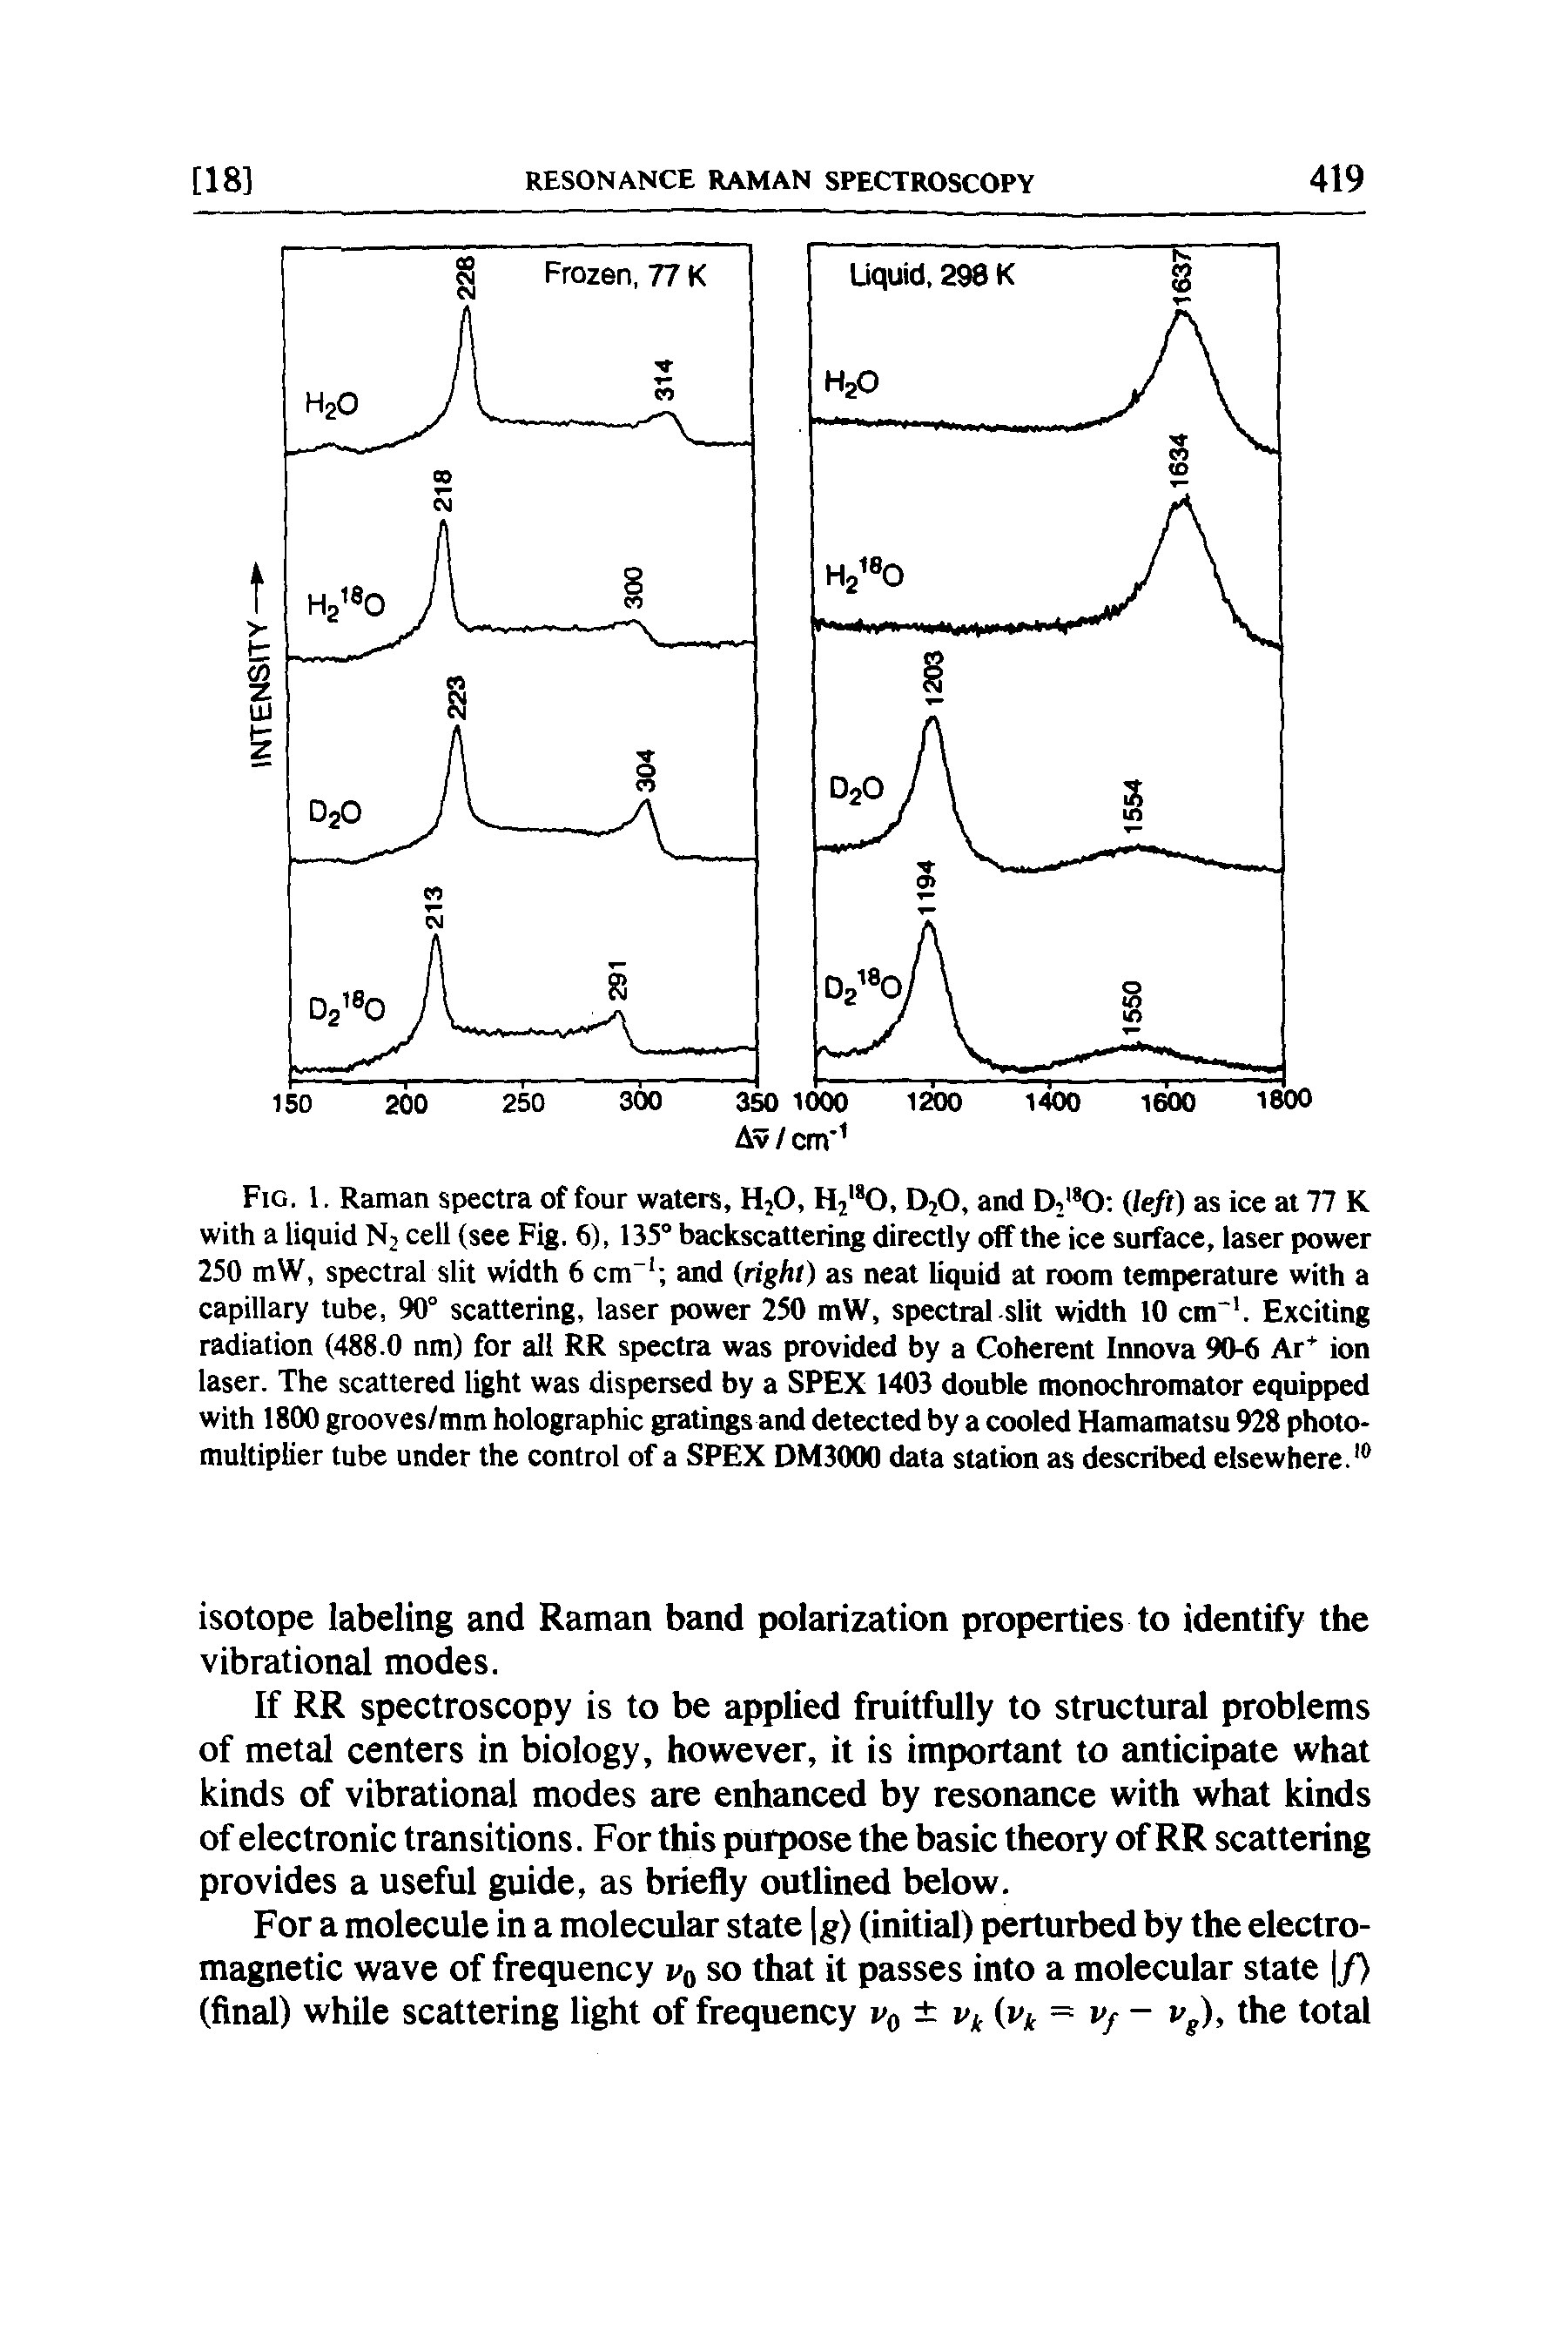 Fig. 1. Raman spectra of four waters, HjO, H2 0, D2O, and Di left) as ice at 77 K with a liquid N2 cell (see Fig. 6), 135° backscattering directly off the ice surface, laser power 250 mW, spectral slit width 6 cm and right) as neat liquid at room temperature with a capillary tube, 90° scattering, laser power 250 mW, spectral slit width 10 cm". Exciting radiation (488.0 nm) for all RR spectra was provided by a Coherent Innova 90-6 Ar ion laser. The scattered light was dispersed by a SPEX 1403 double monochromator equipped with 1800 grooves/mm holographic gratings and detected by a cooled Hamamatsu 928 photomultiplier tube under the control of a SPEX DM3000 data station as described elsewhere. ...